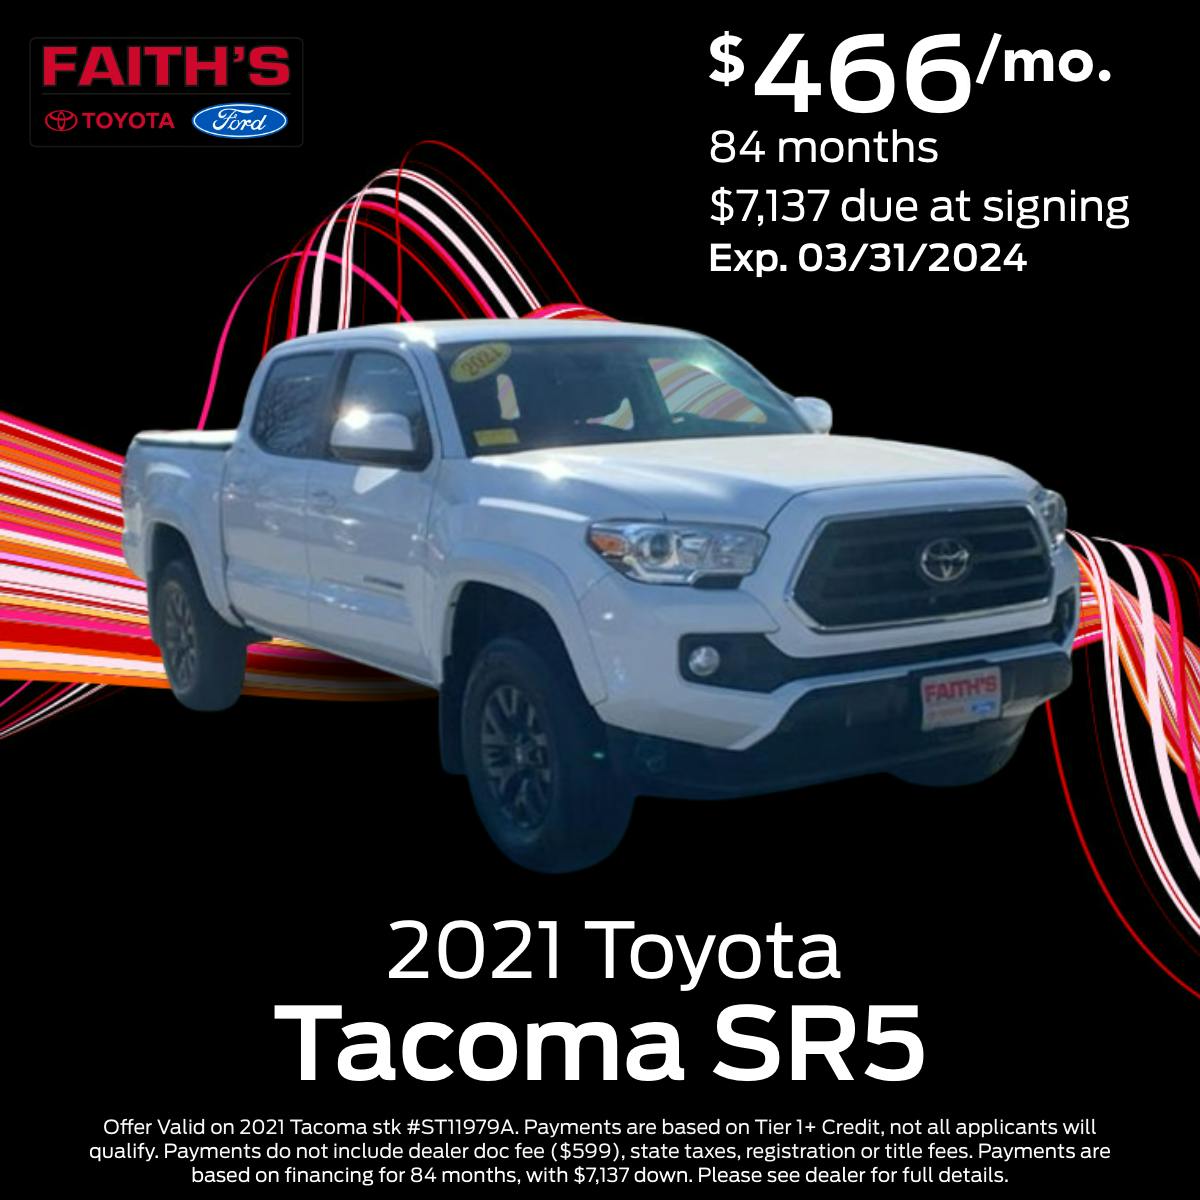 2021 Toyota Tacoma Purchase Offer | Faiths Ford